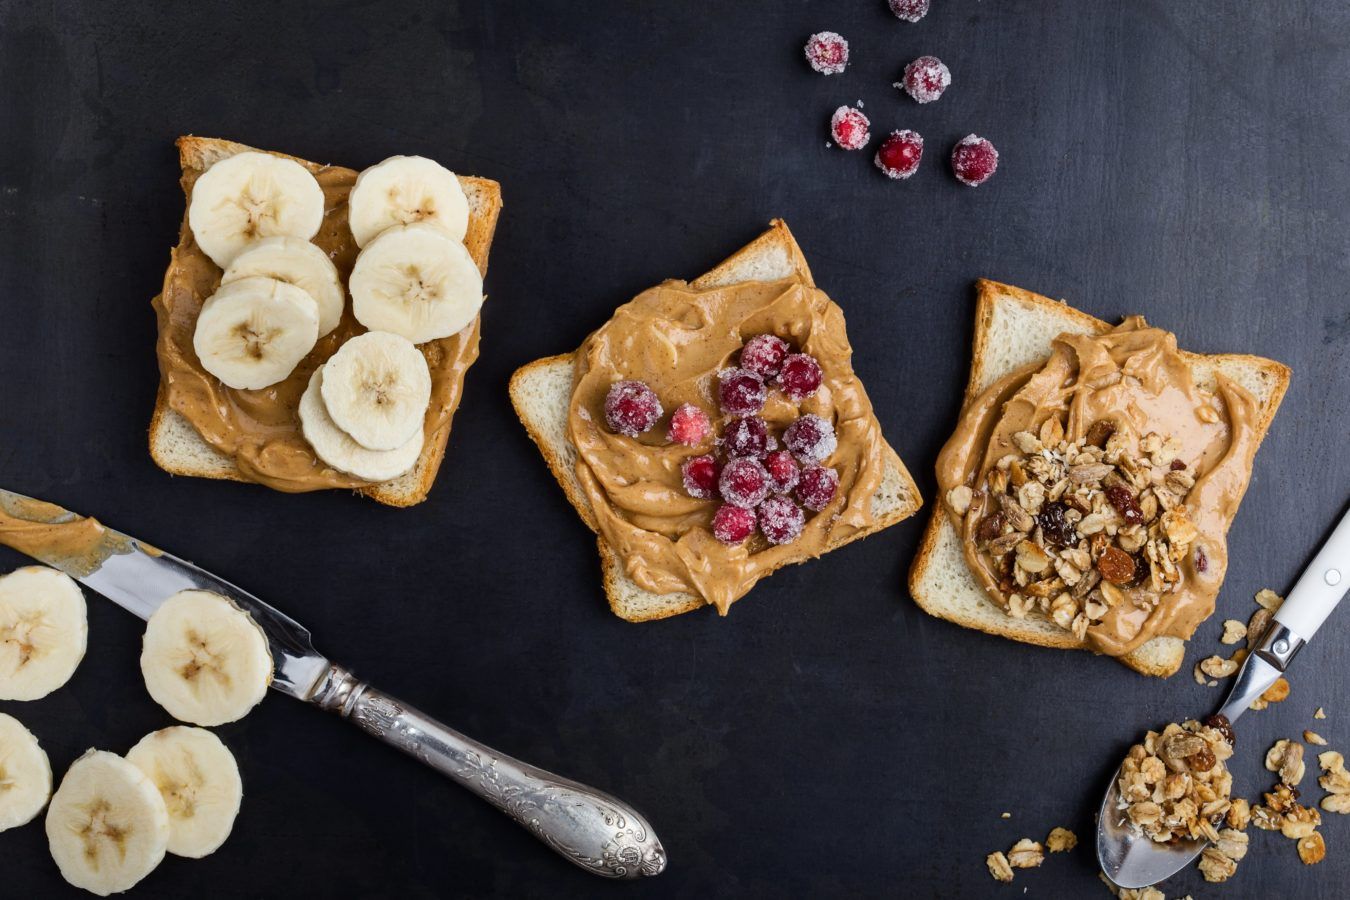 Add sweet and savoury flavours to your breakfast with these nut butters